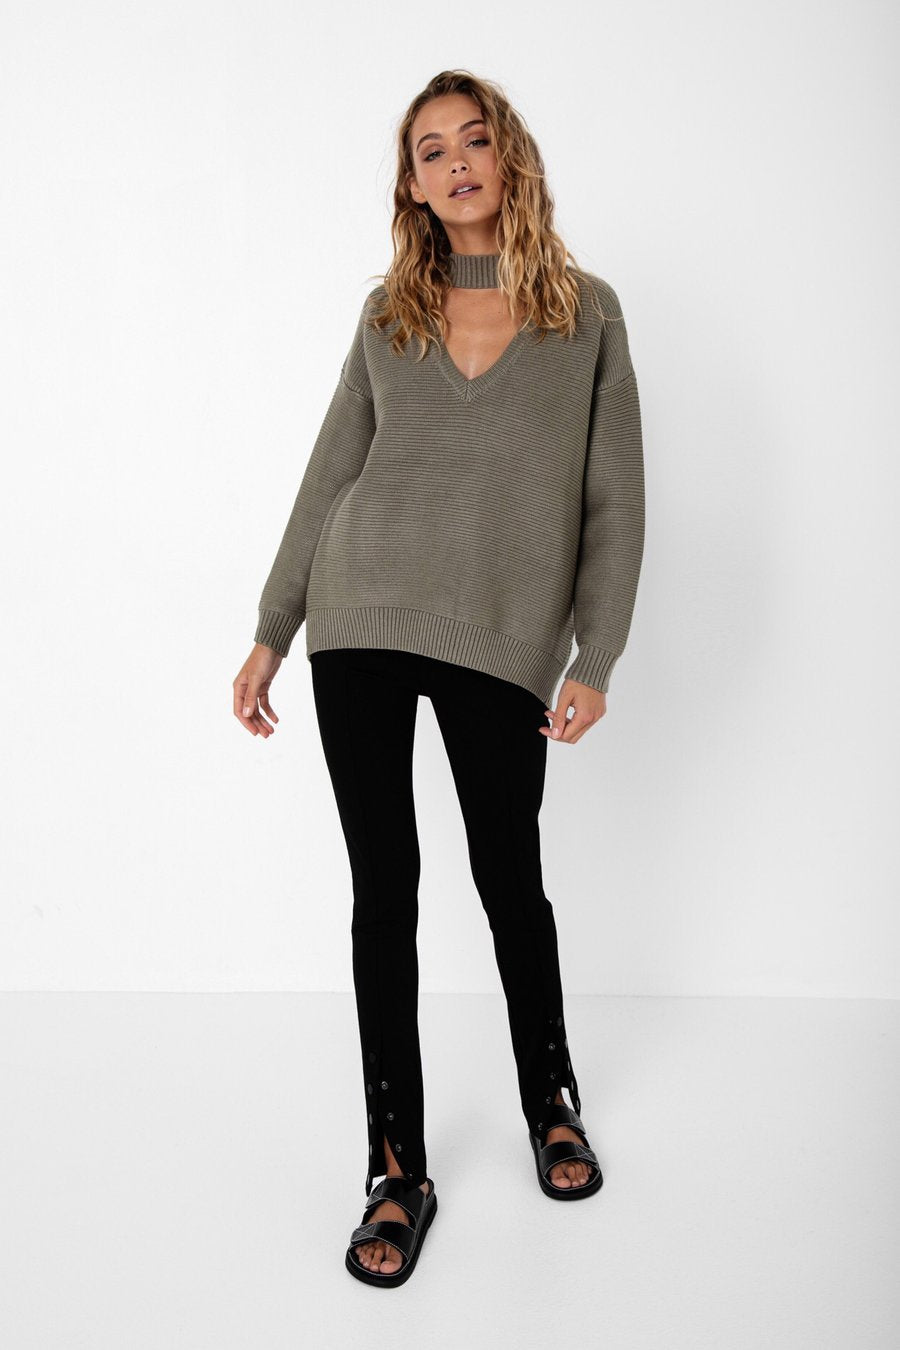 Oversized sweater with cutout detail- Frida knit -MS0436 (avail in khaki or black)